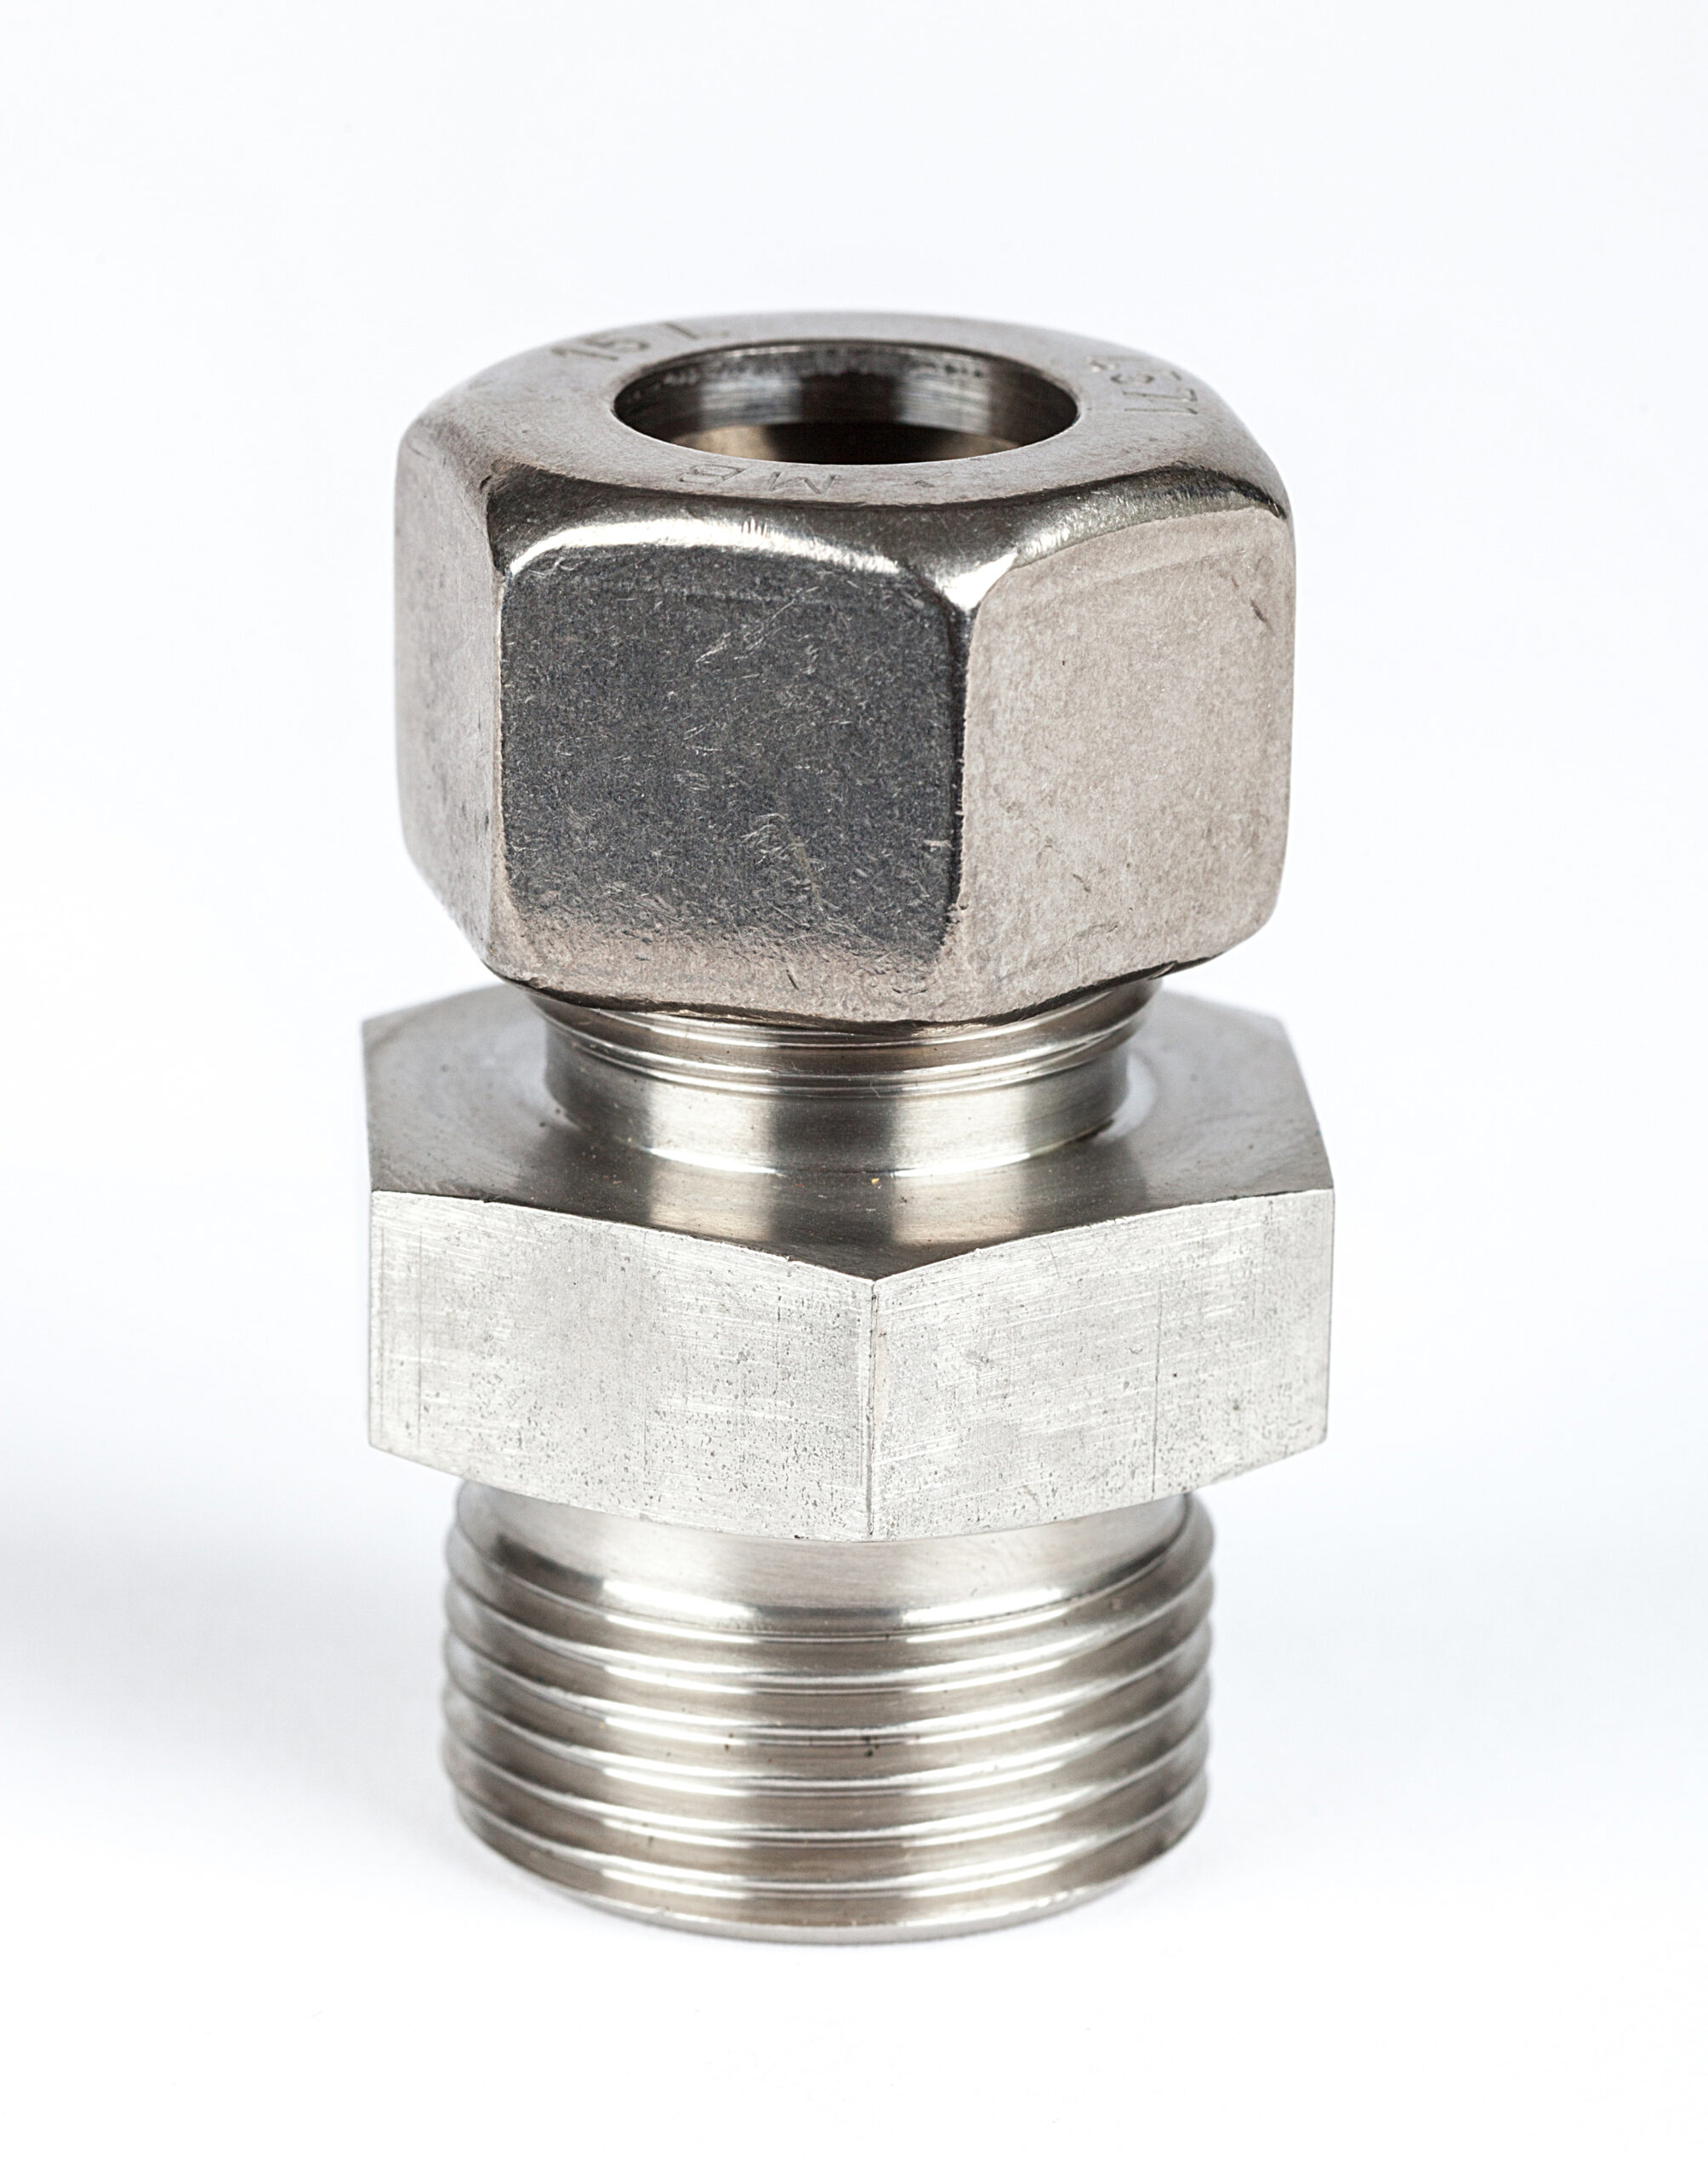 Male Stud Coupling BSPP